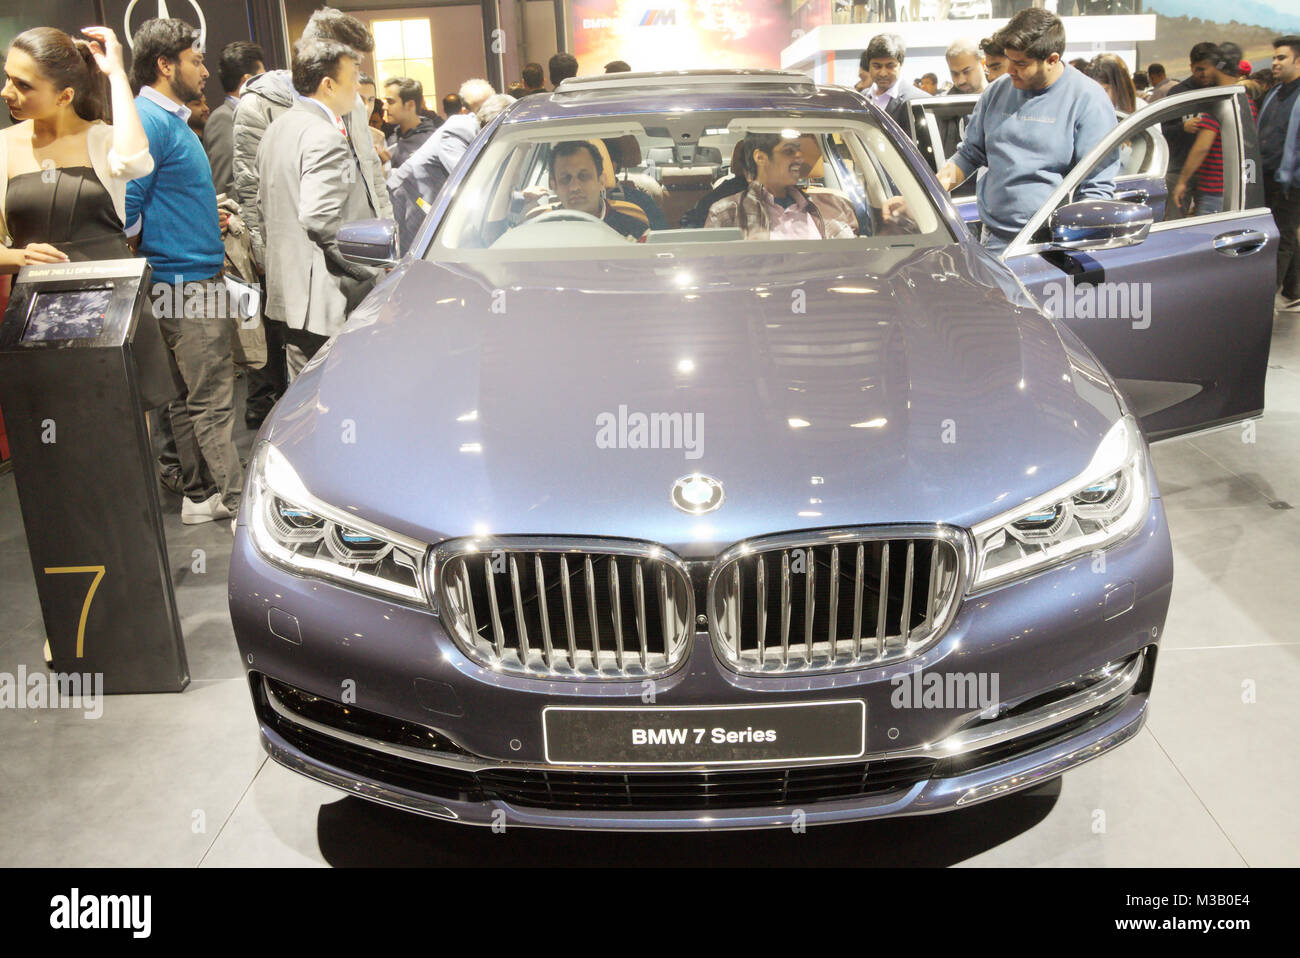 Greater Noida, India. 9th February 2018. Visitors try to get a feel of BMW 740 Li DPE Signature car on display at the Auto Expo 2018 at India Expo Mart in Greater Noida, India. The Auto Expo is a biennial event and is being held during 9th to 14th February 2018. Credit: Karunesh Johri/Alamy Live News. Stock Photo